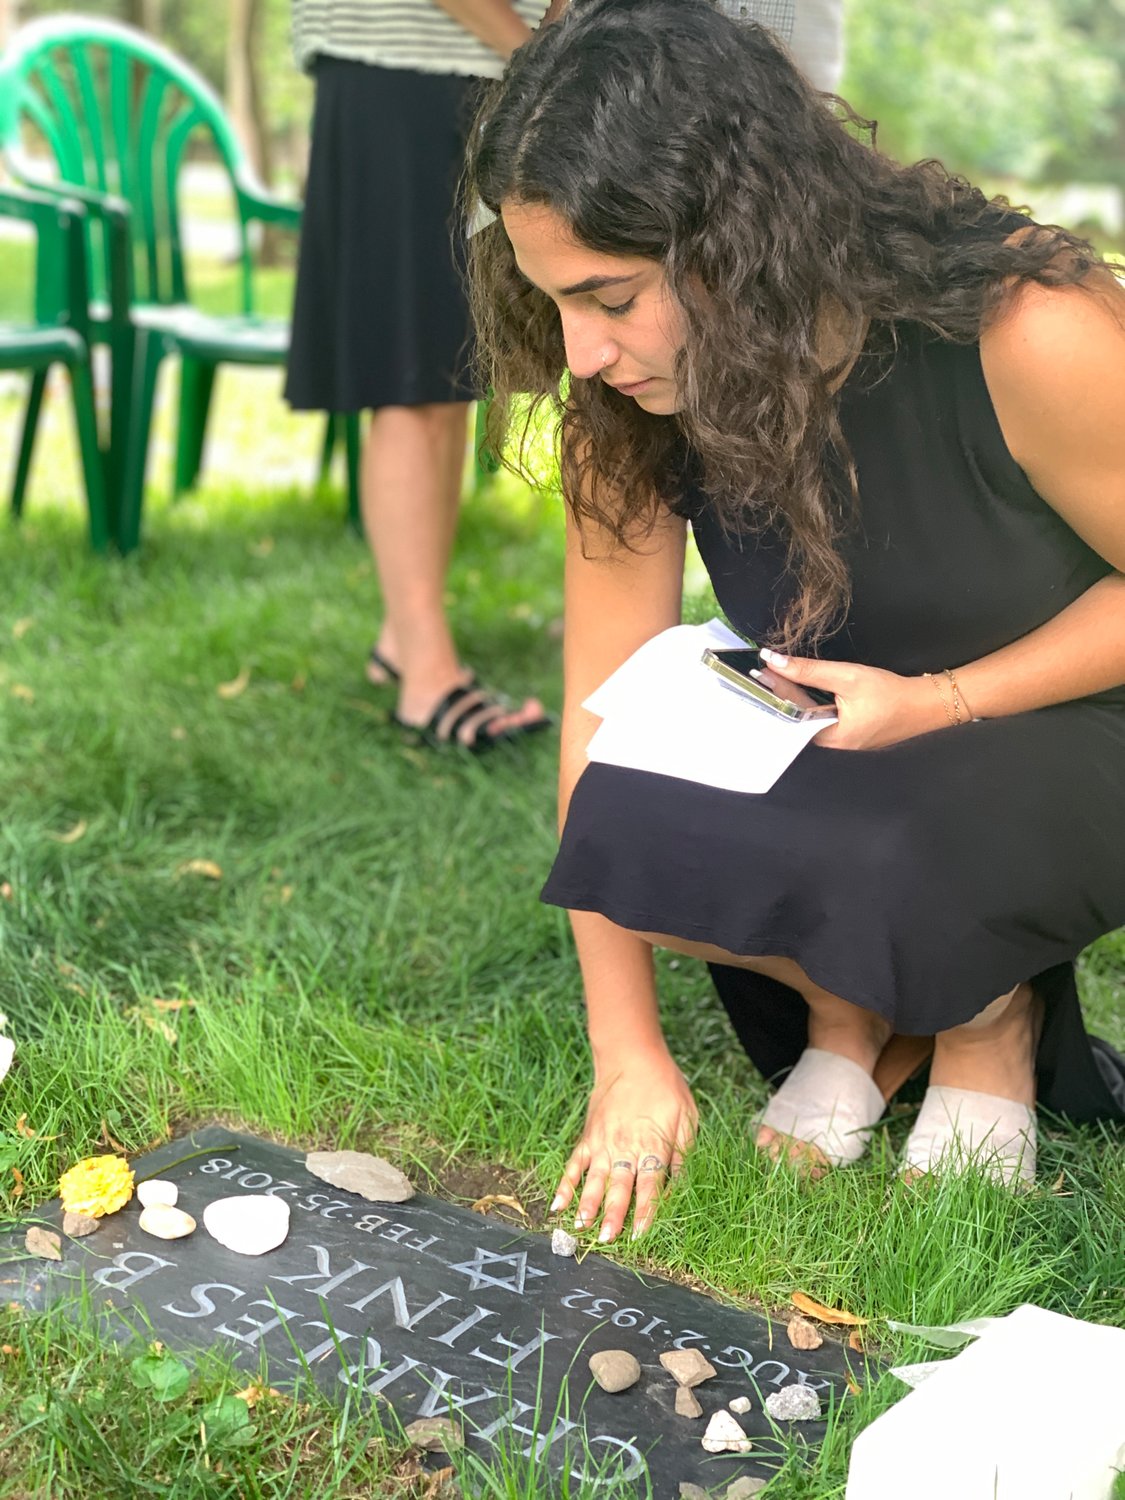 Julia places a pebble on her grandfather’s grave at the unveiling.